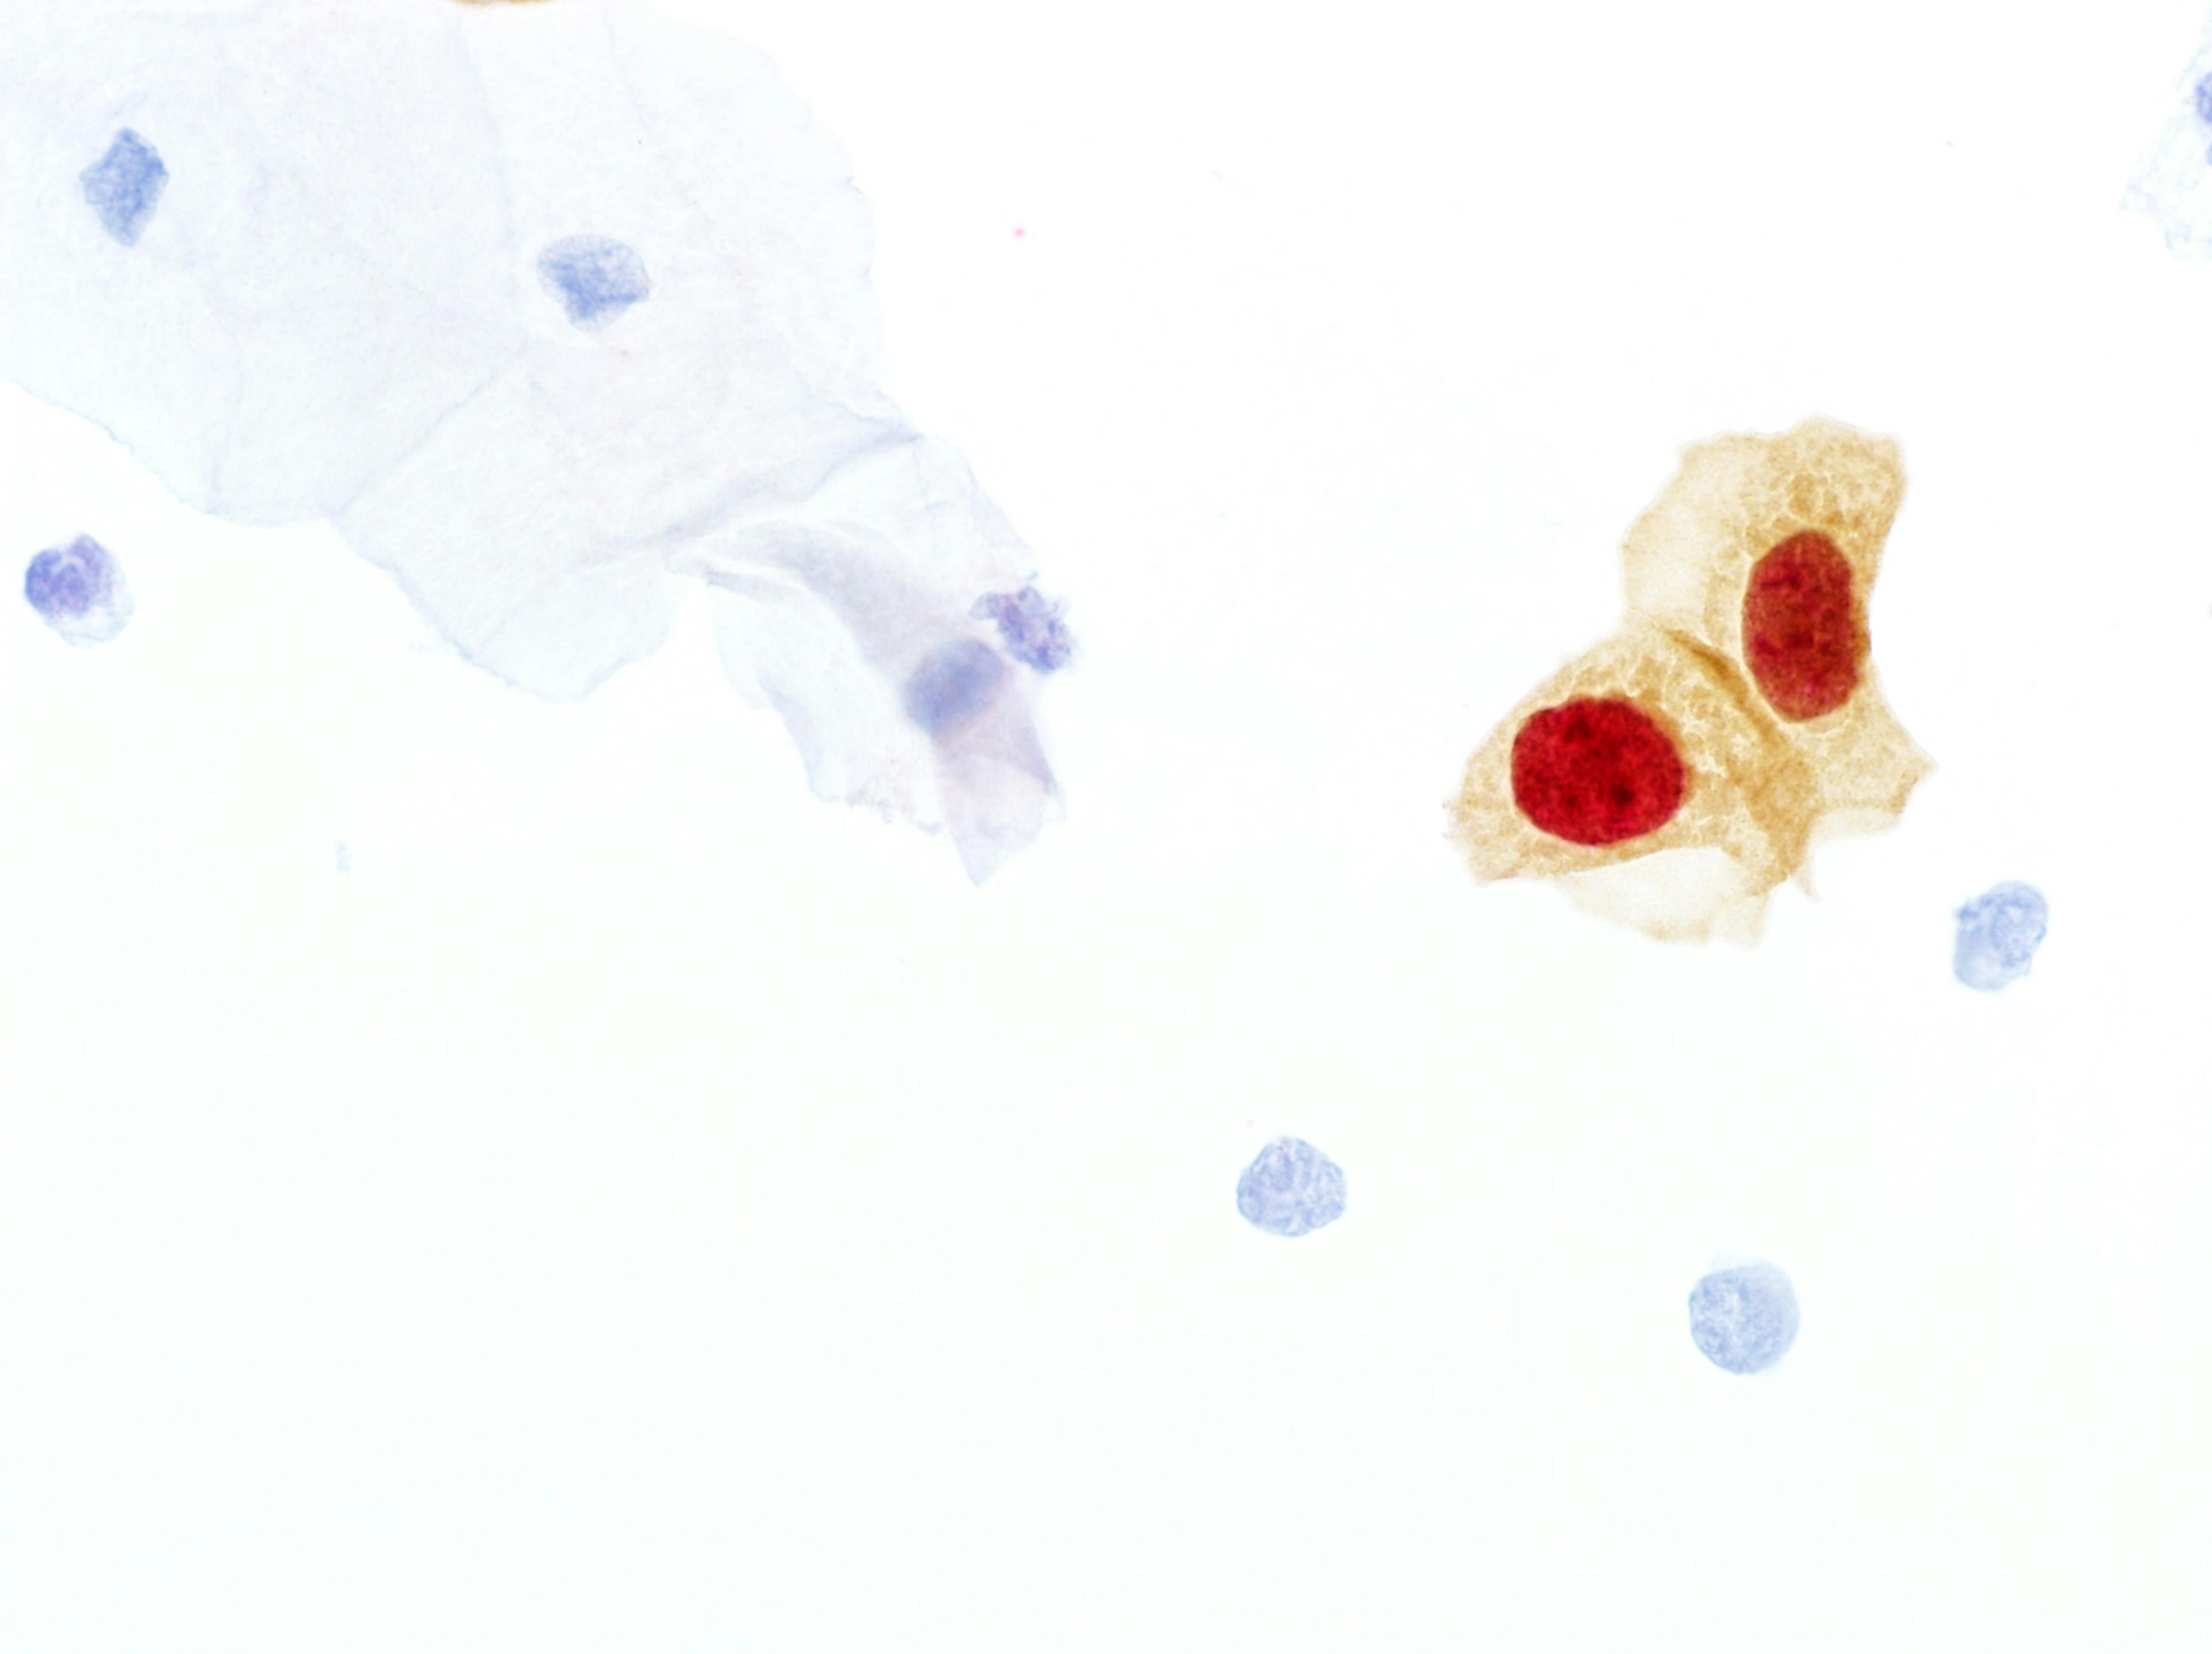 Positive CINtec PLUS Cytology test results, dual staining of the biomarkers p16 and Ki-67. Microphotograph courtesy of Roche. 